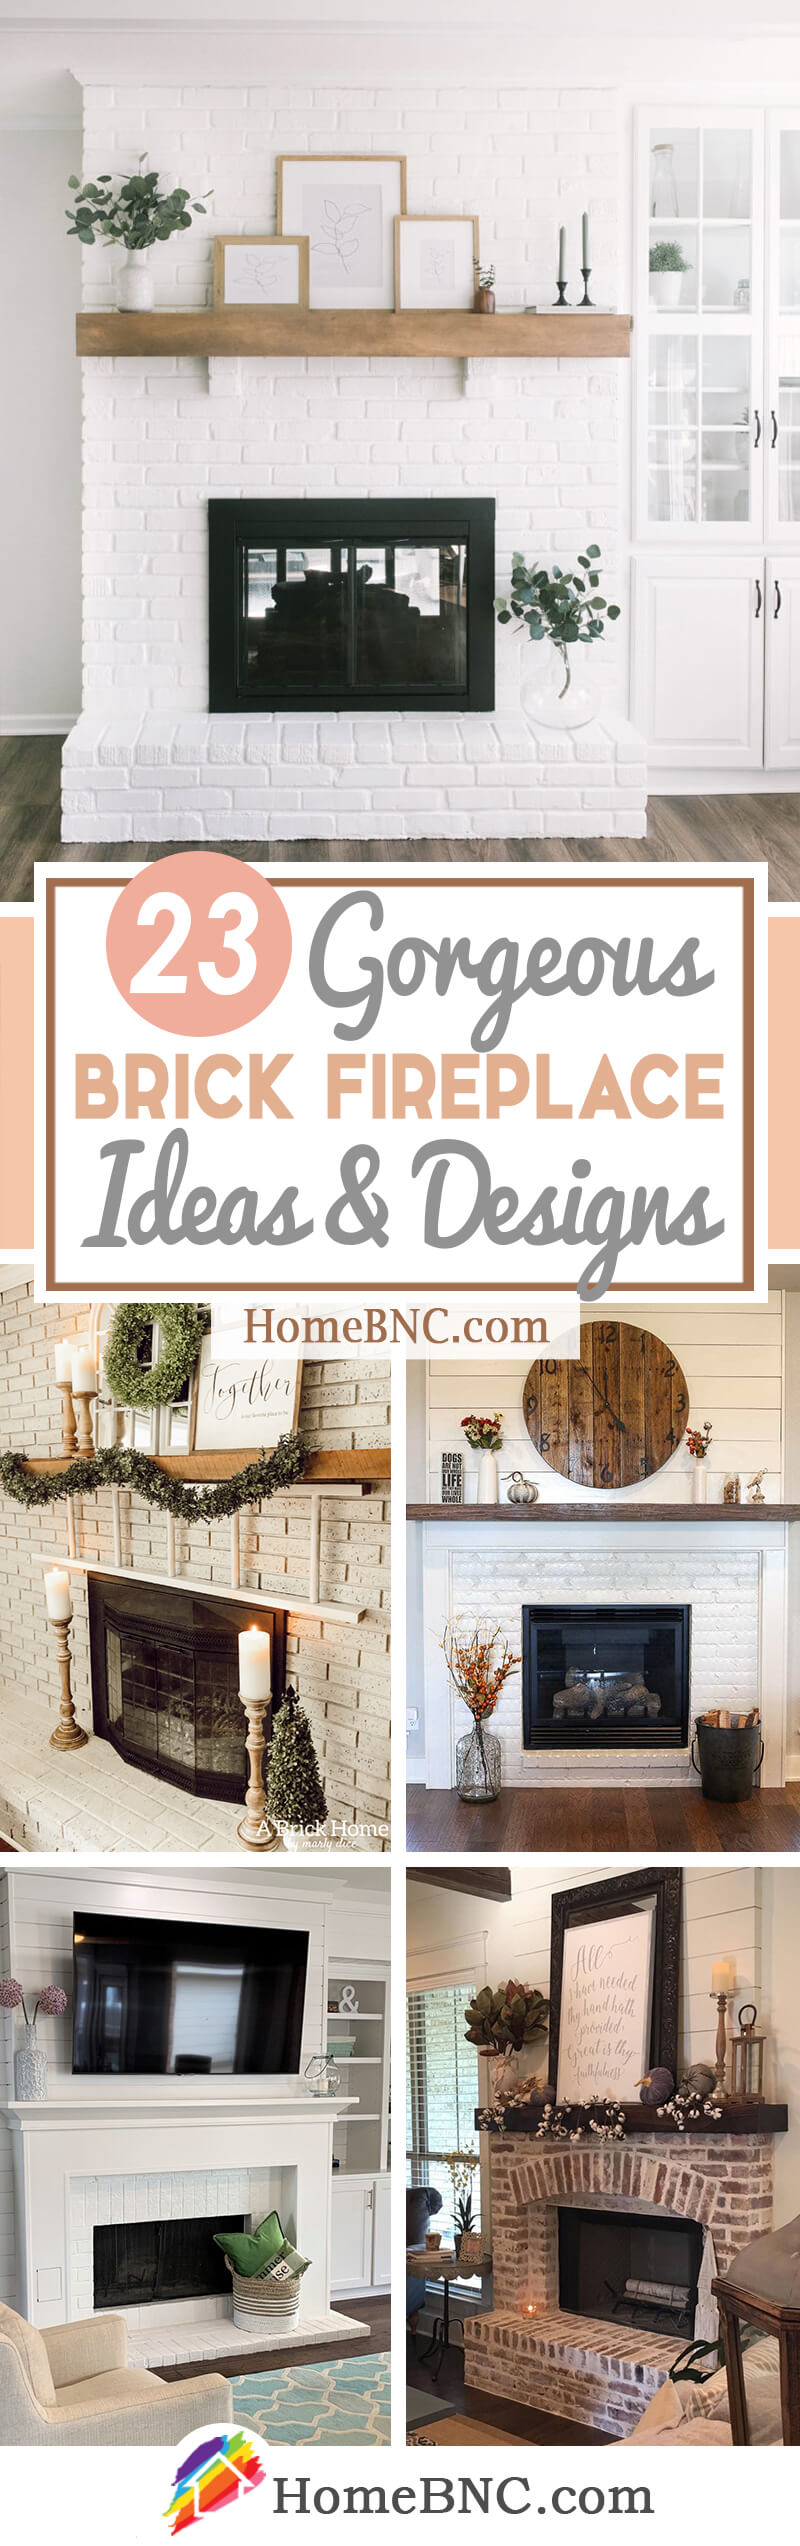 23 Best Brick Fireplace Ideas To Make, How Can I Make My Brick Fireplace Look Better